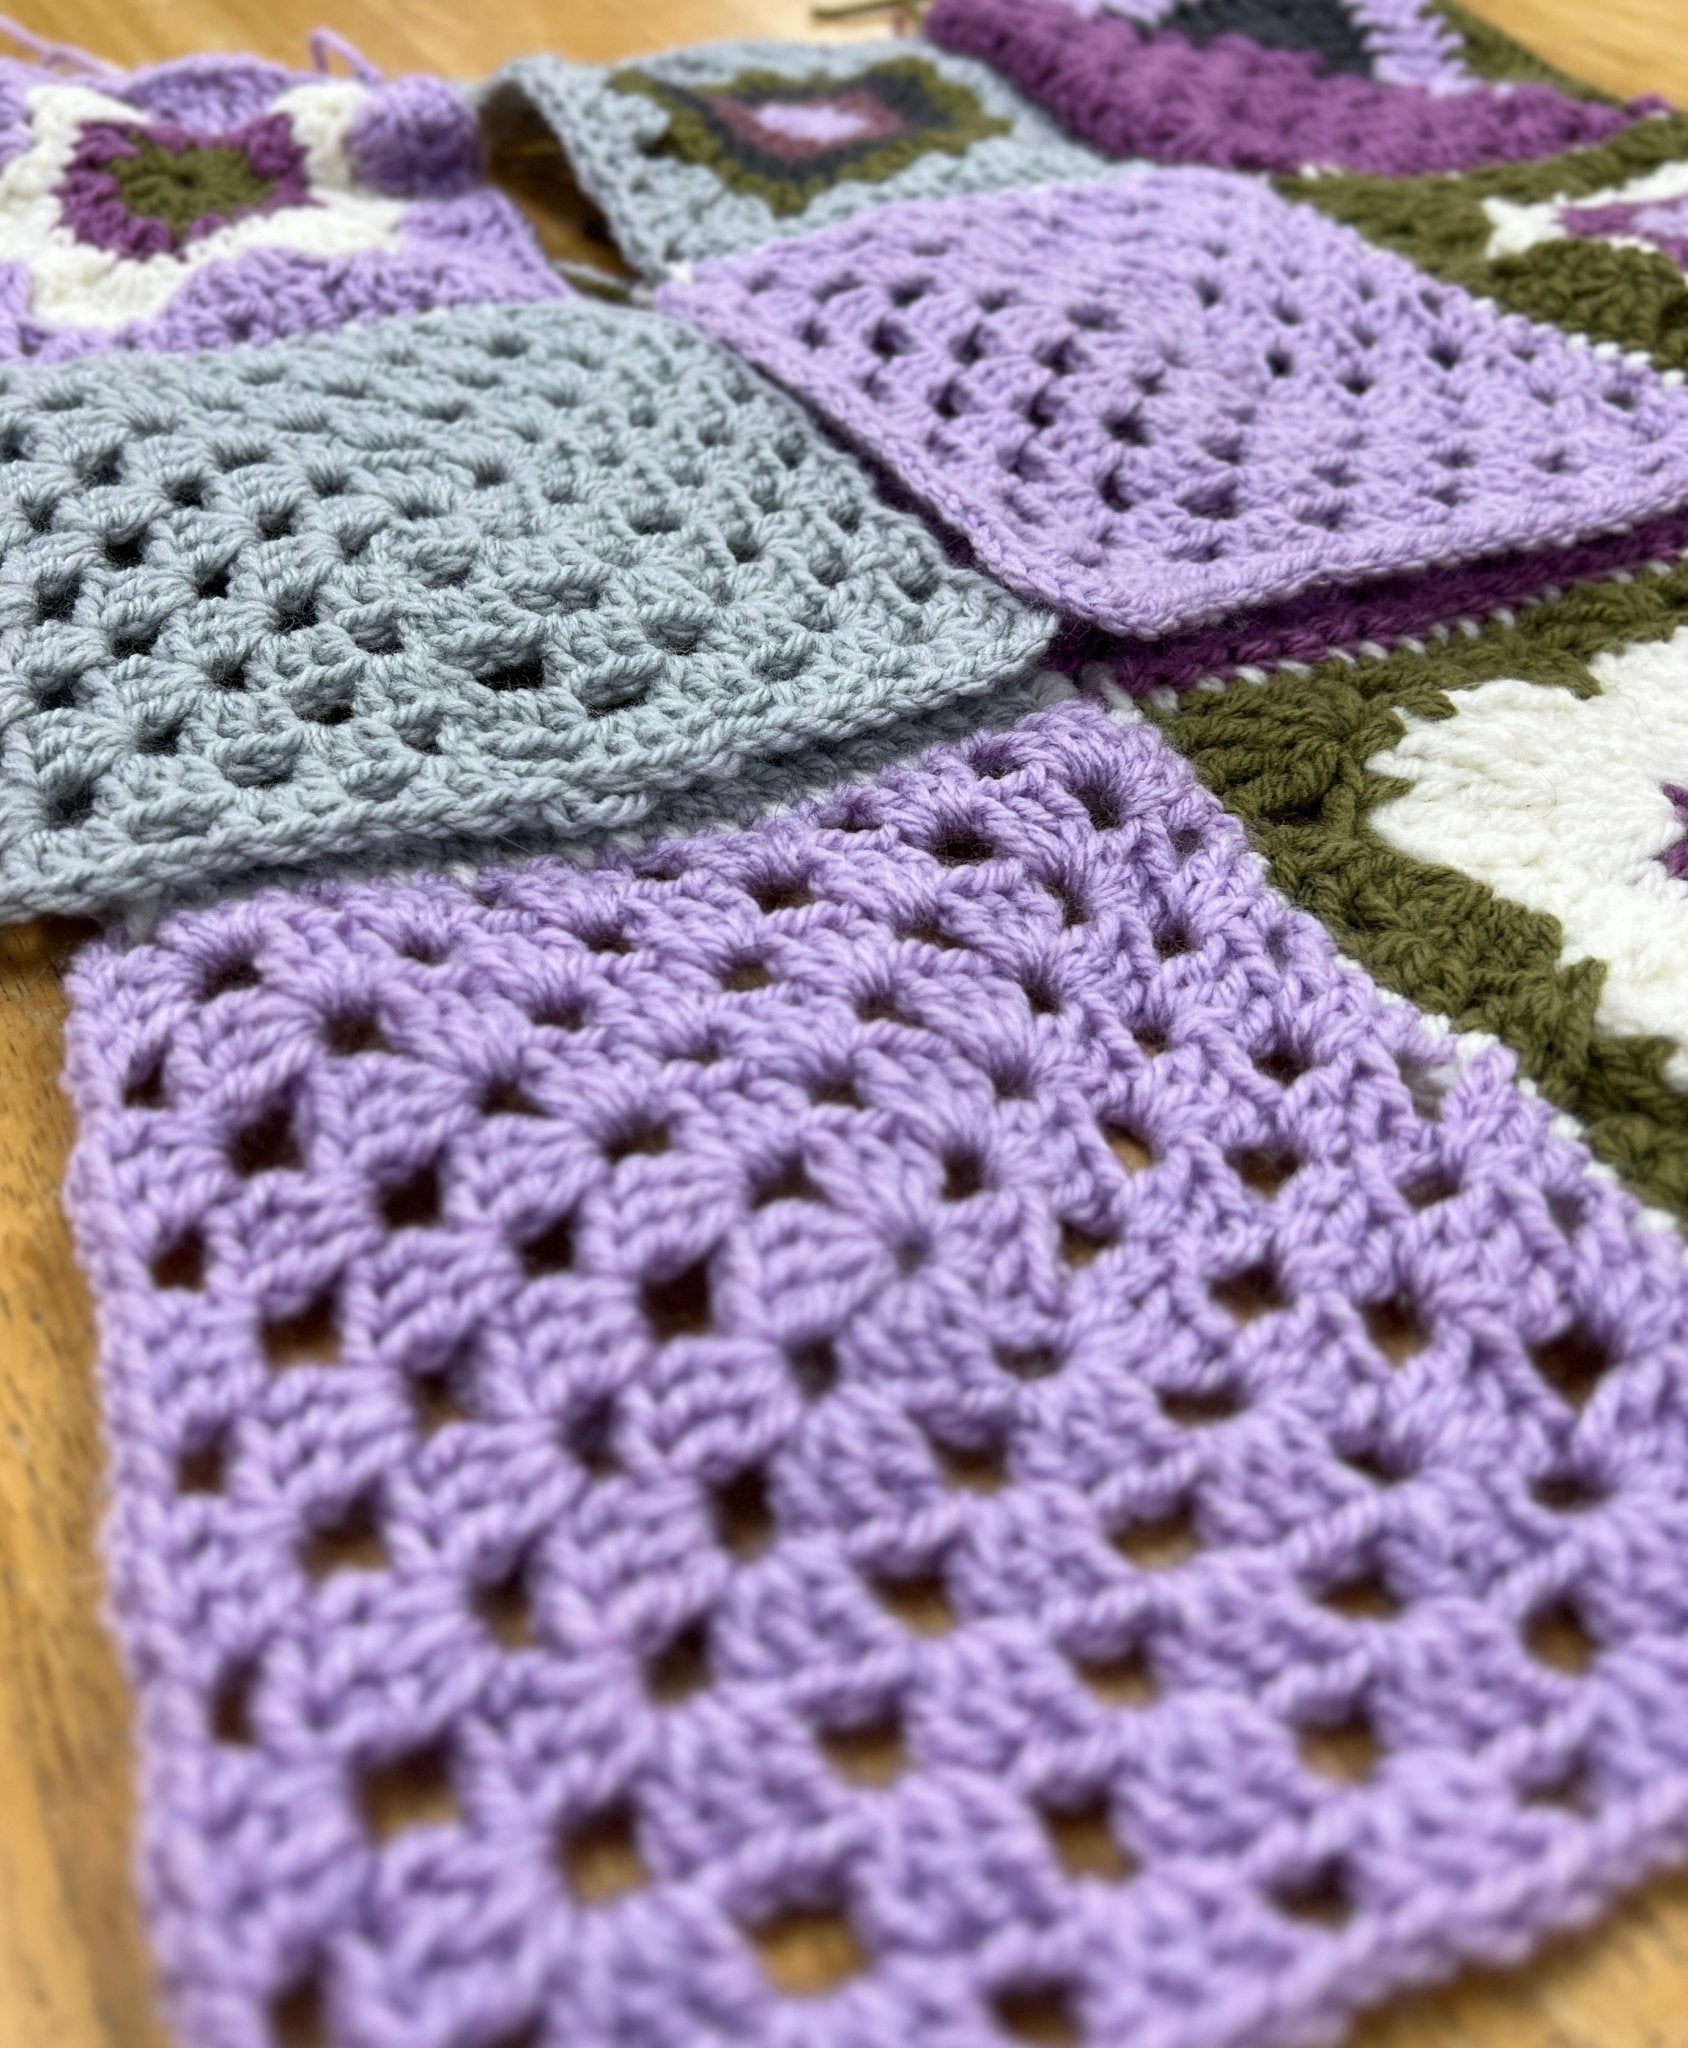 Intro to Granny Squares Workshop - Classes at Michigan Fine Yarns